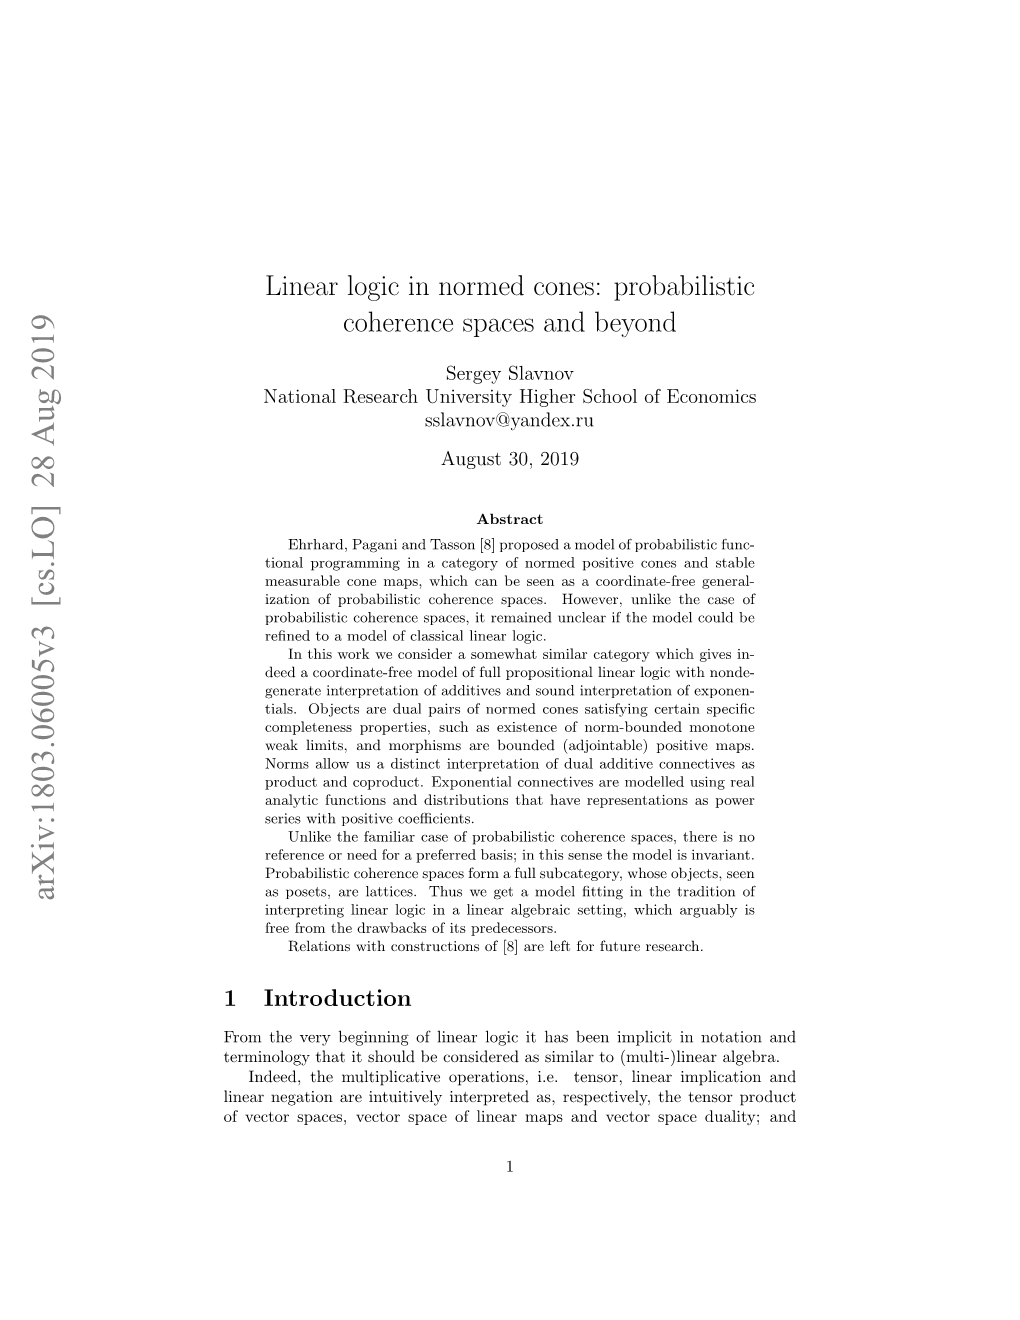 Linear Logic in Normed Cones: Probabilistic Coherence Spaces And